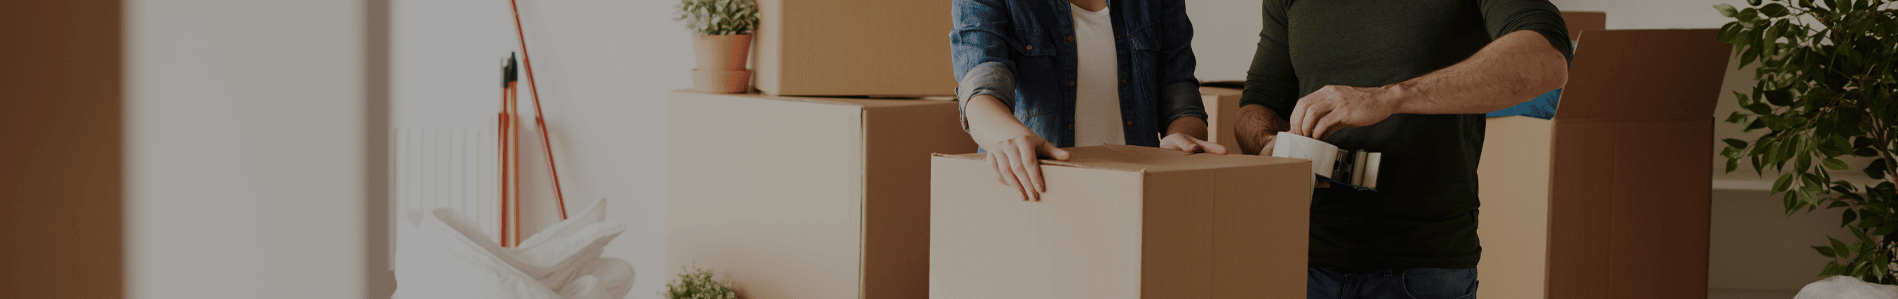 Moving yourself or hiring a moving company?